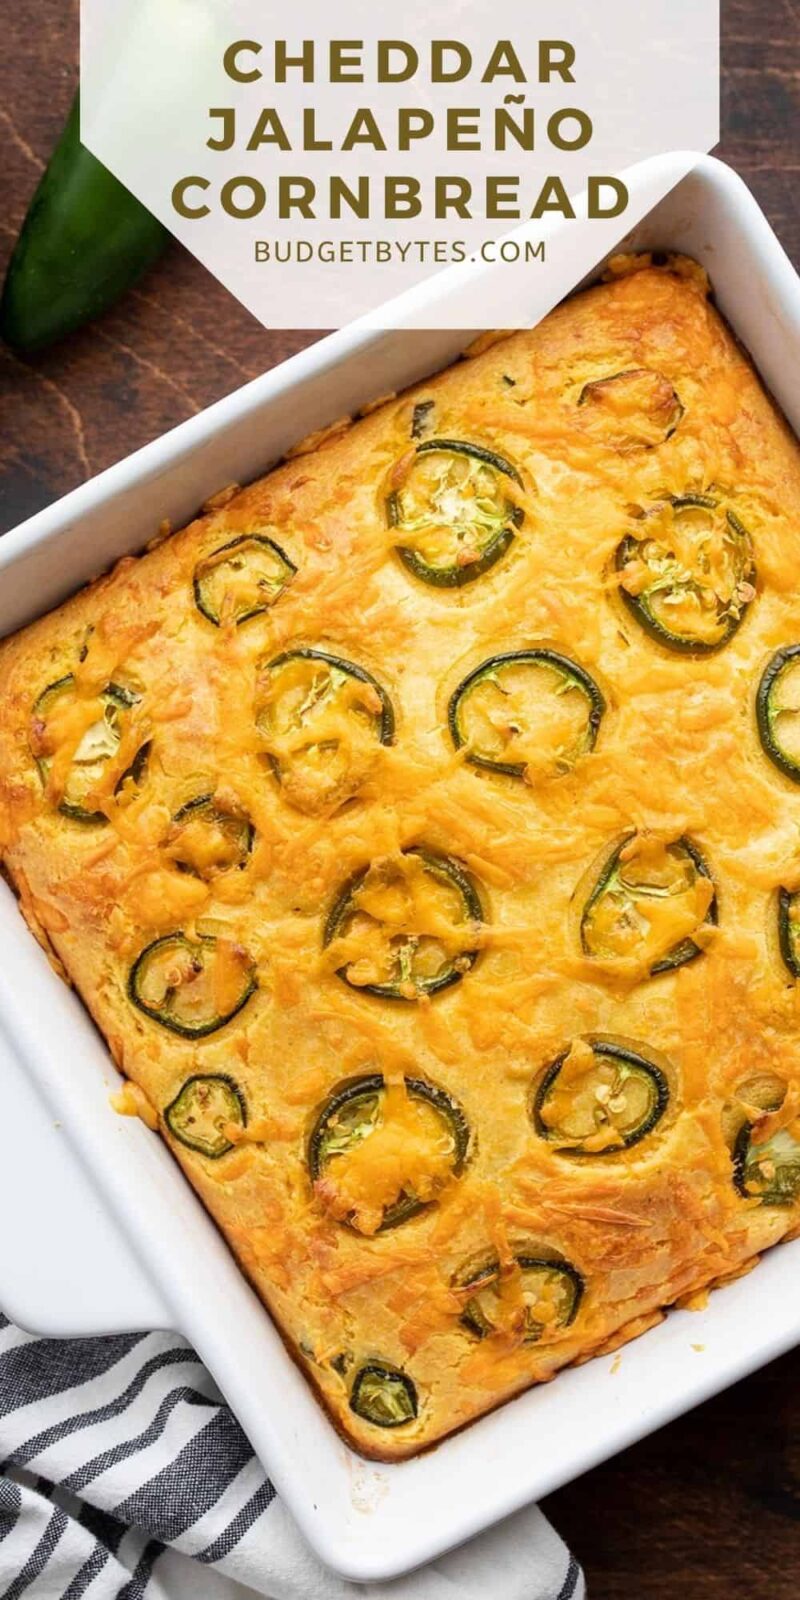 Overhead view of jalapeño cornbread in the baking dish, title text at the top